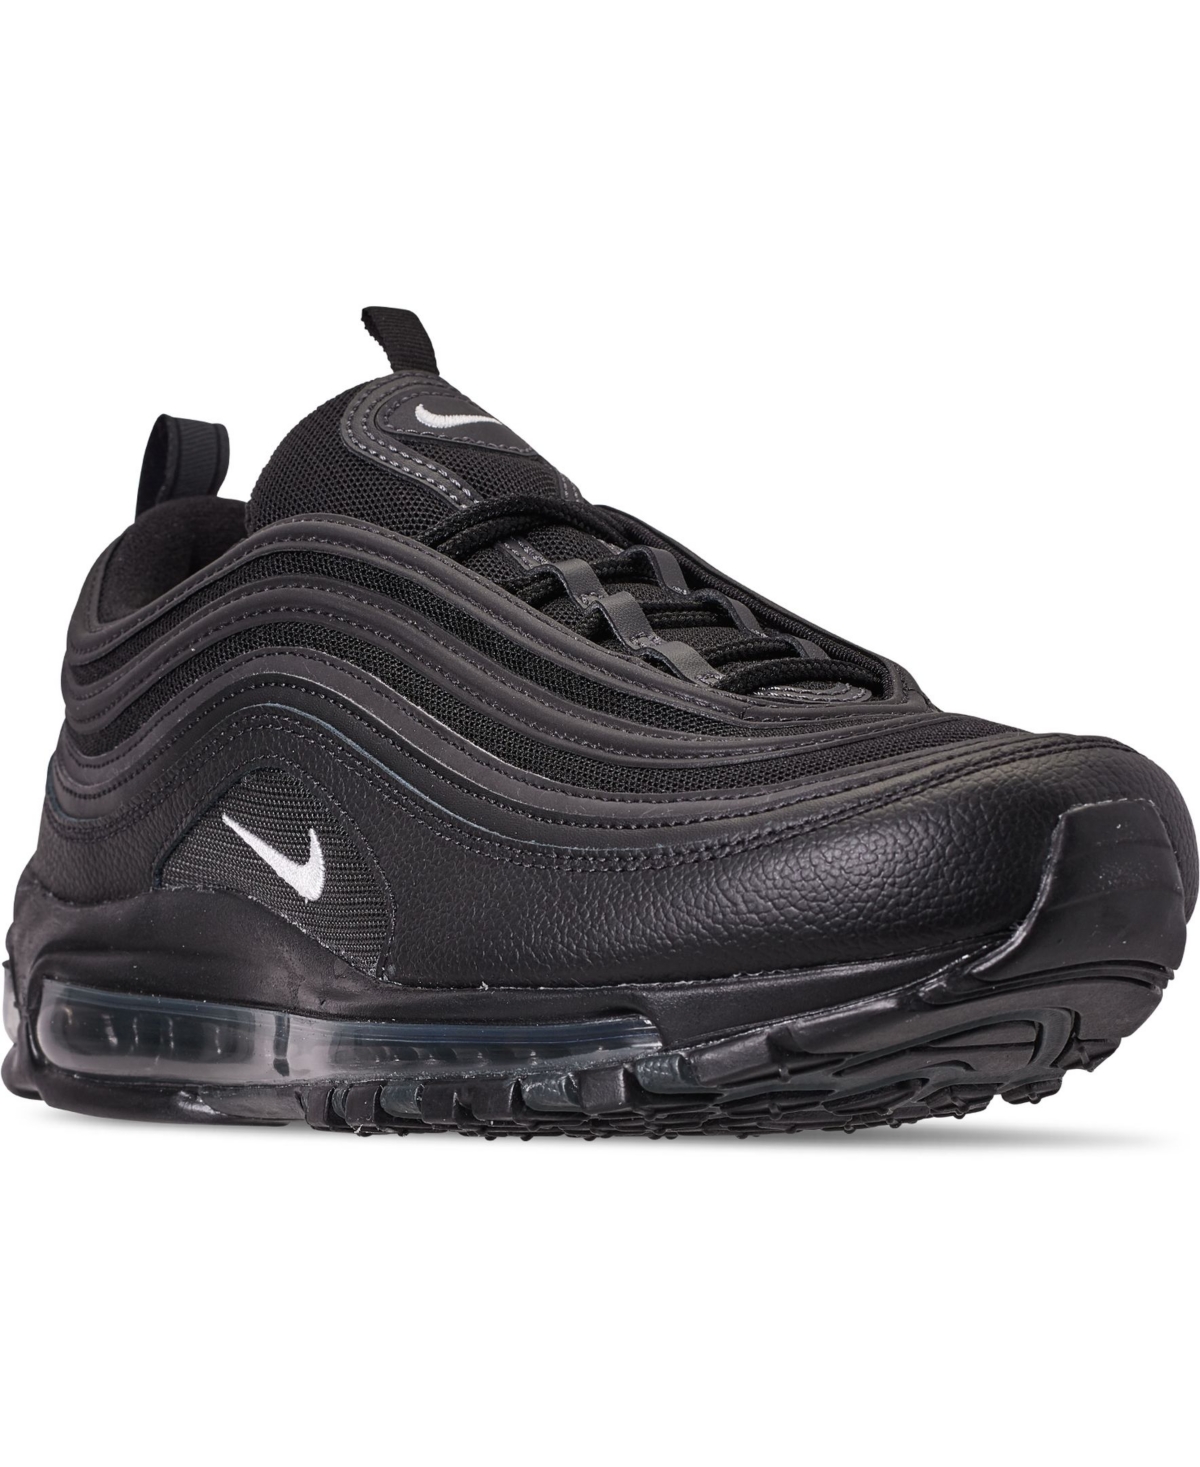 Nike Men's Air Max 97 Running Casual Sneakers from Finish Line